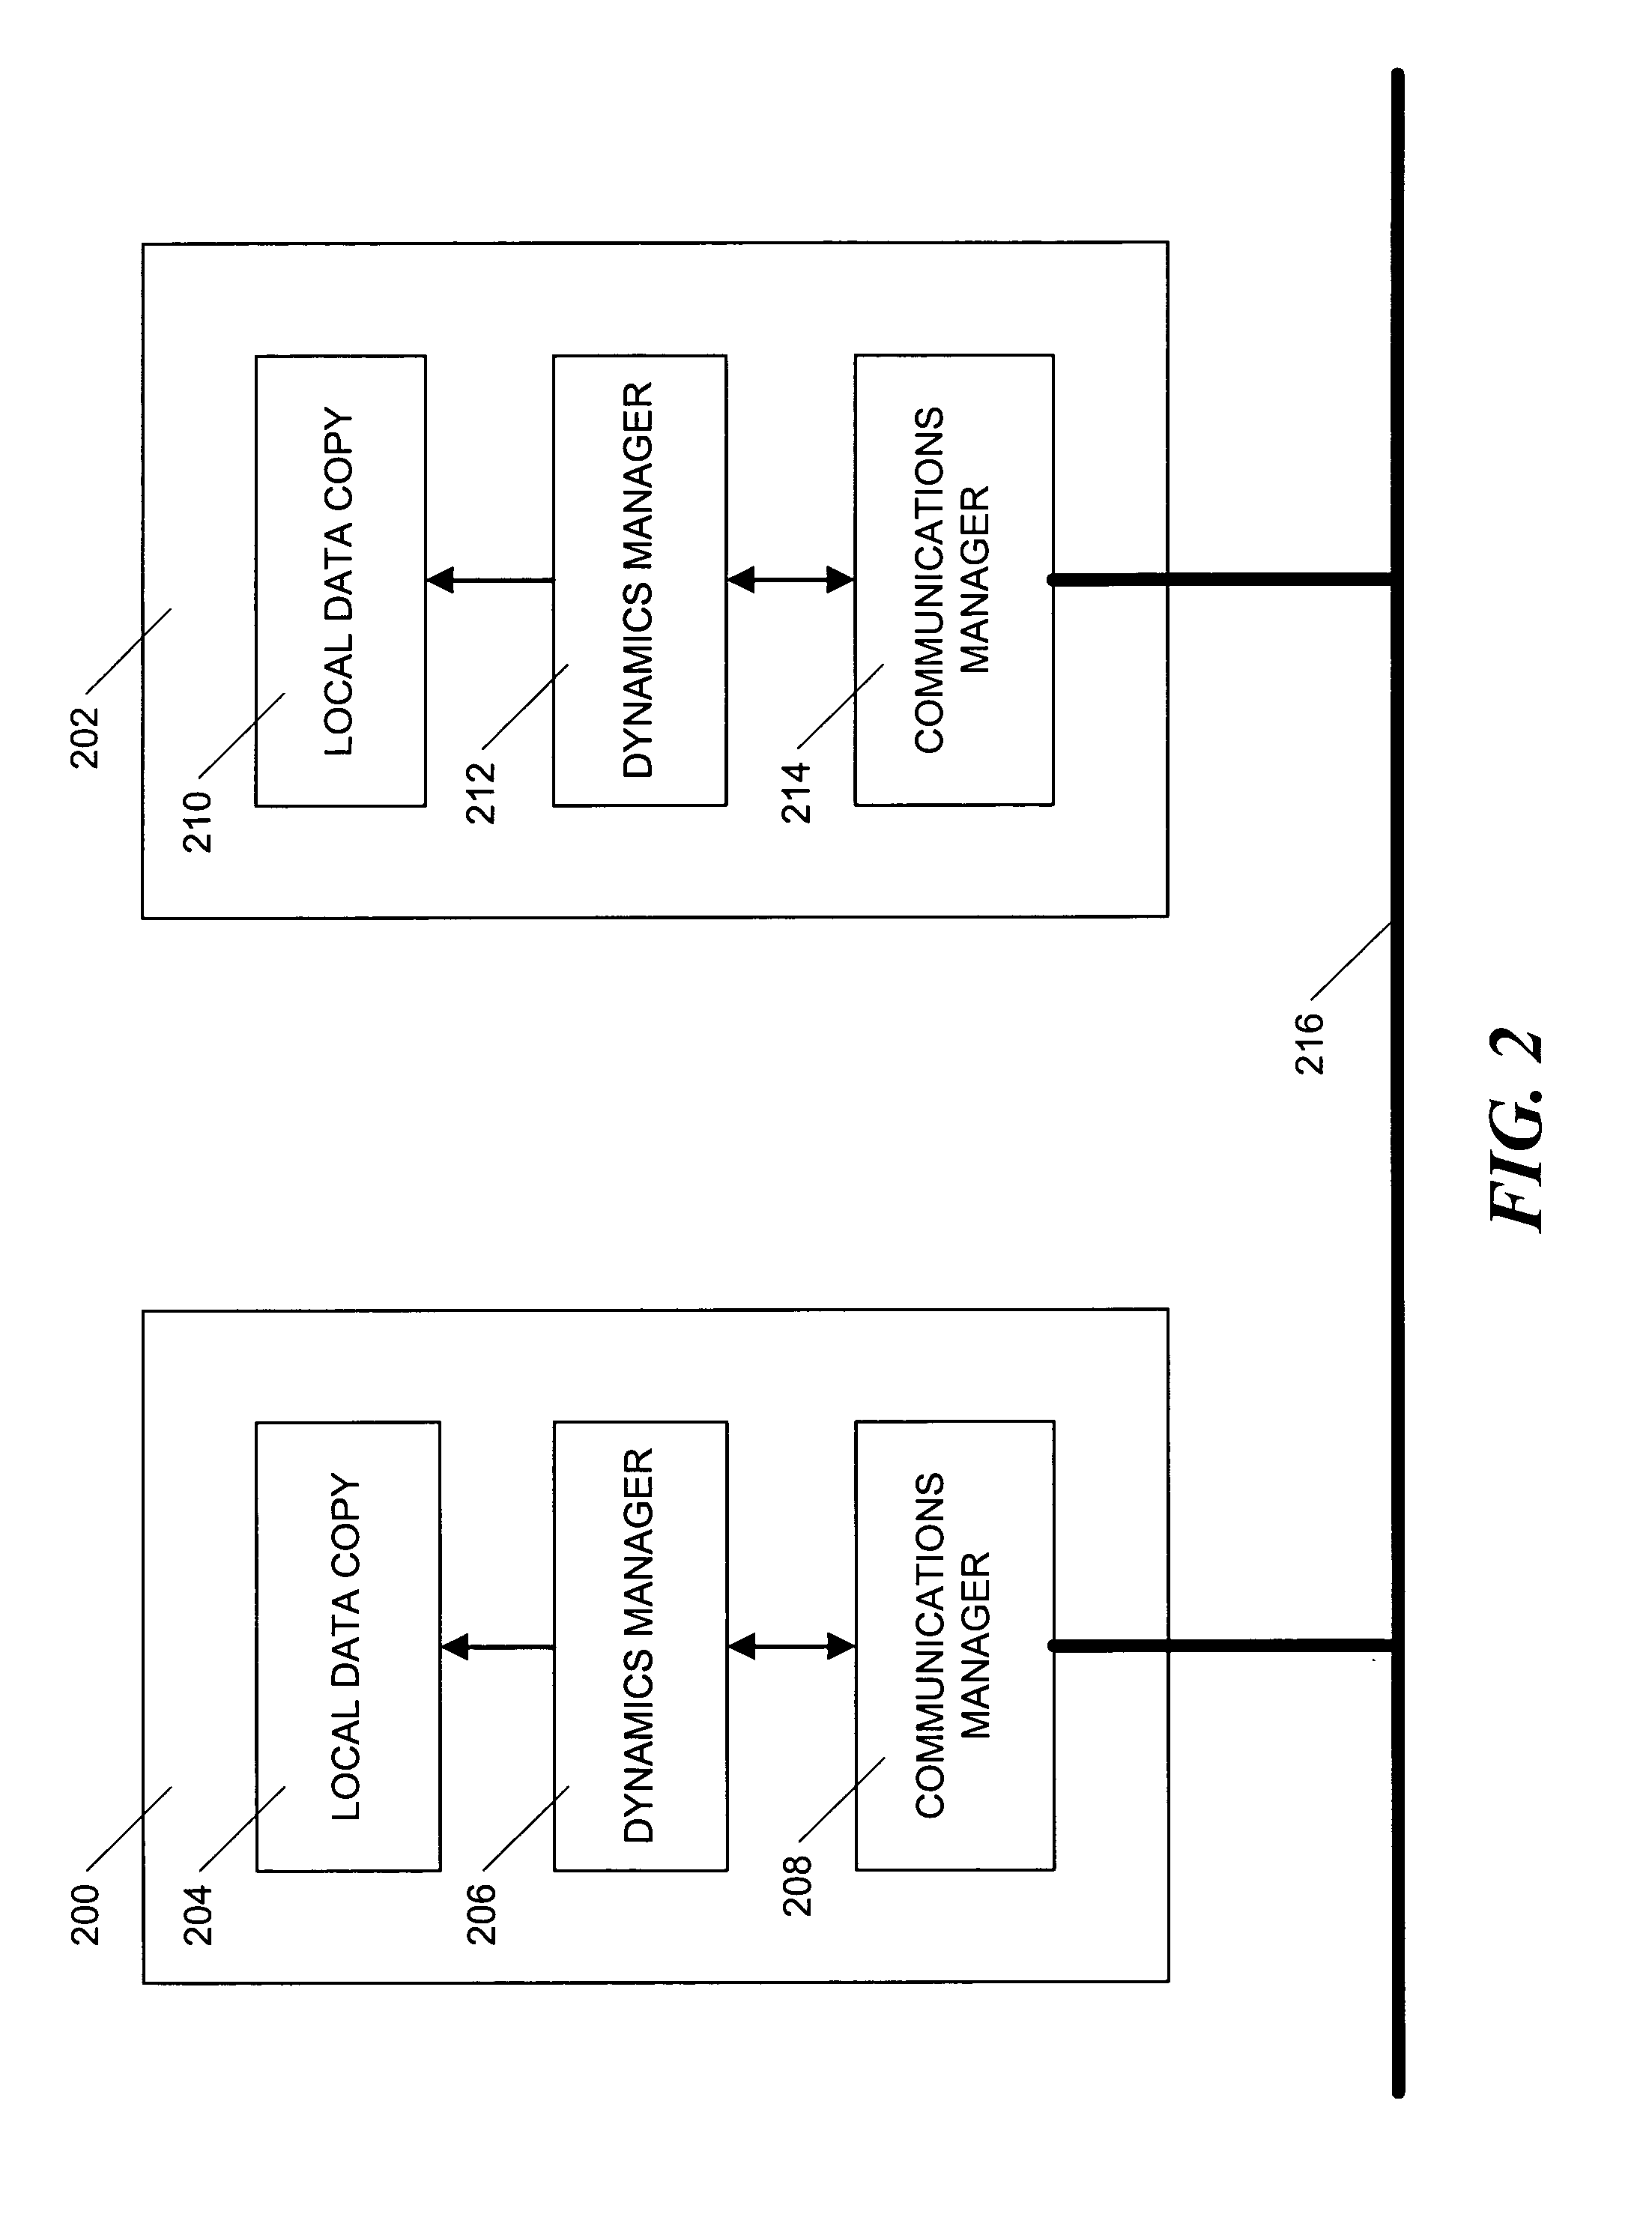 Method and apparatus for managing secure collaborative transactions